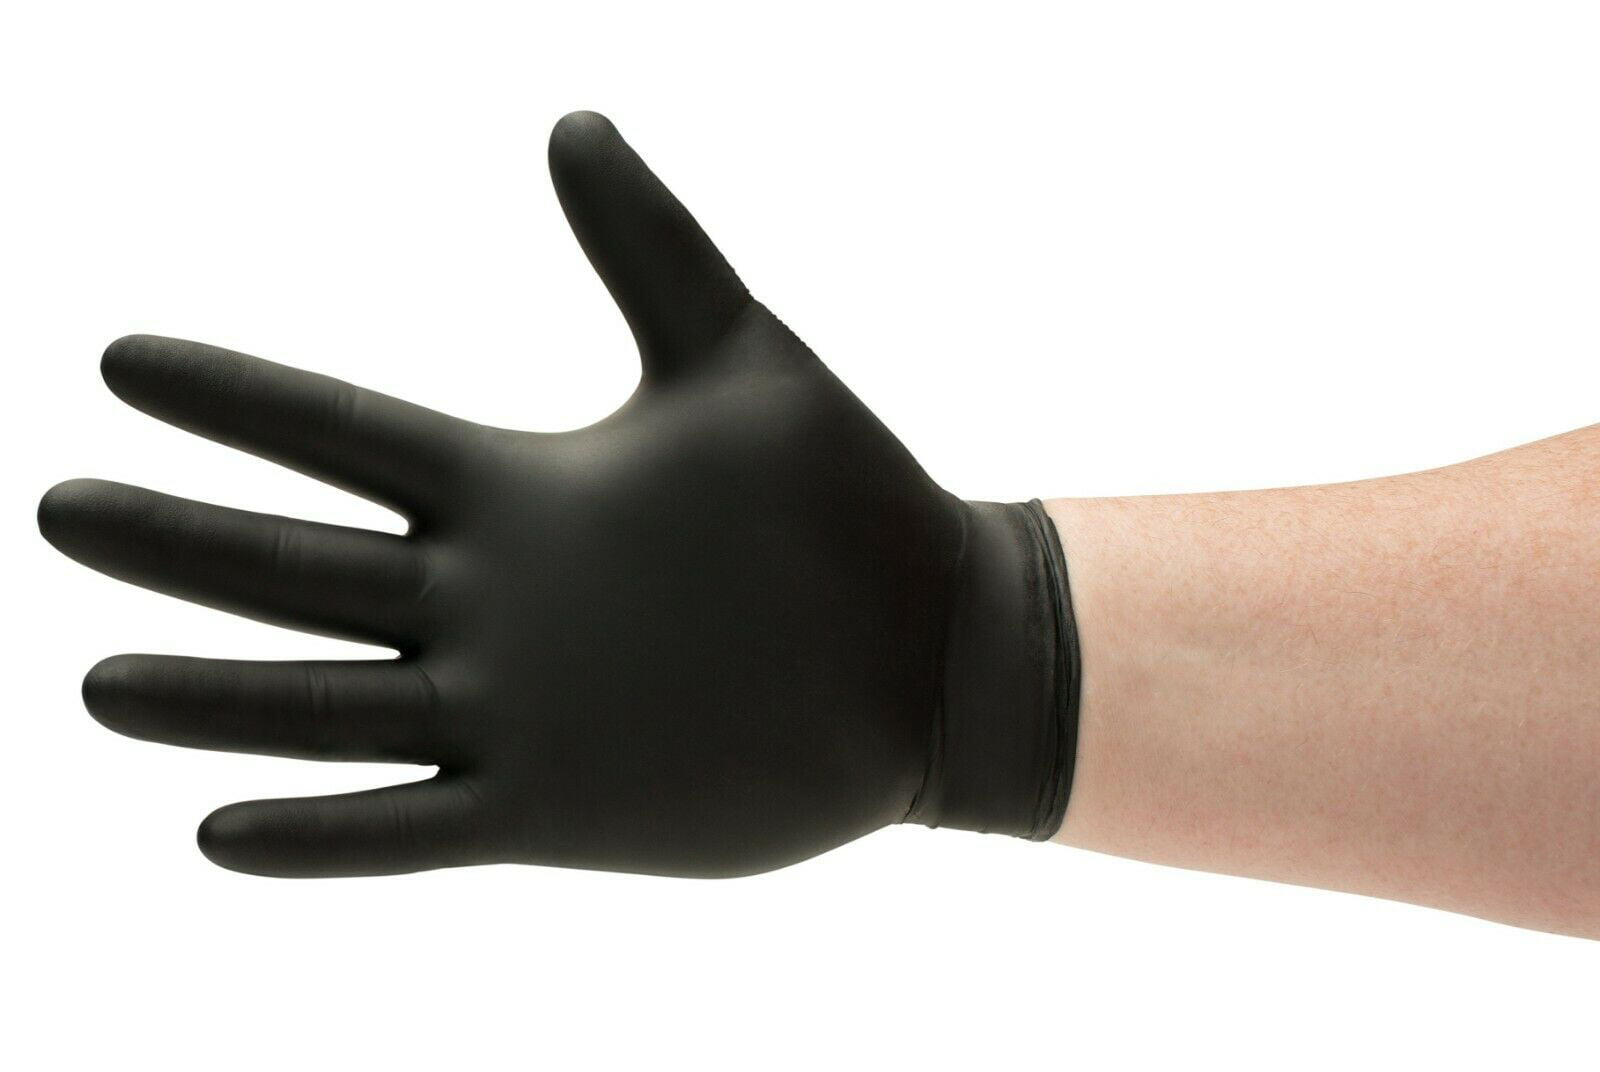 X-Large 2000 Foodservice Vinyl Disposable Gloves Powdered Latex Nitrile Free 